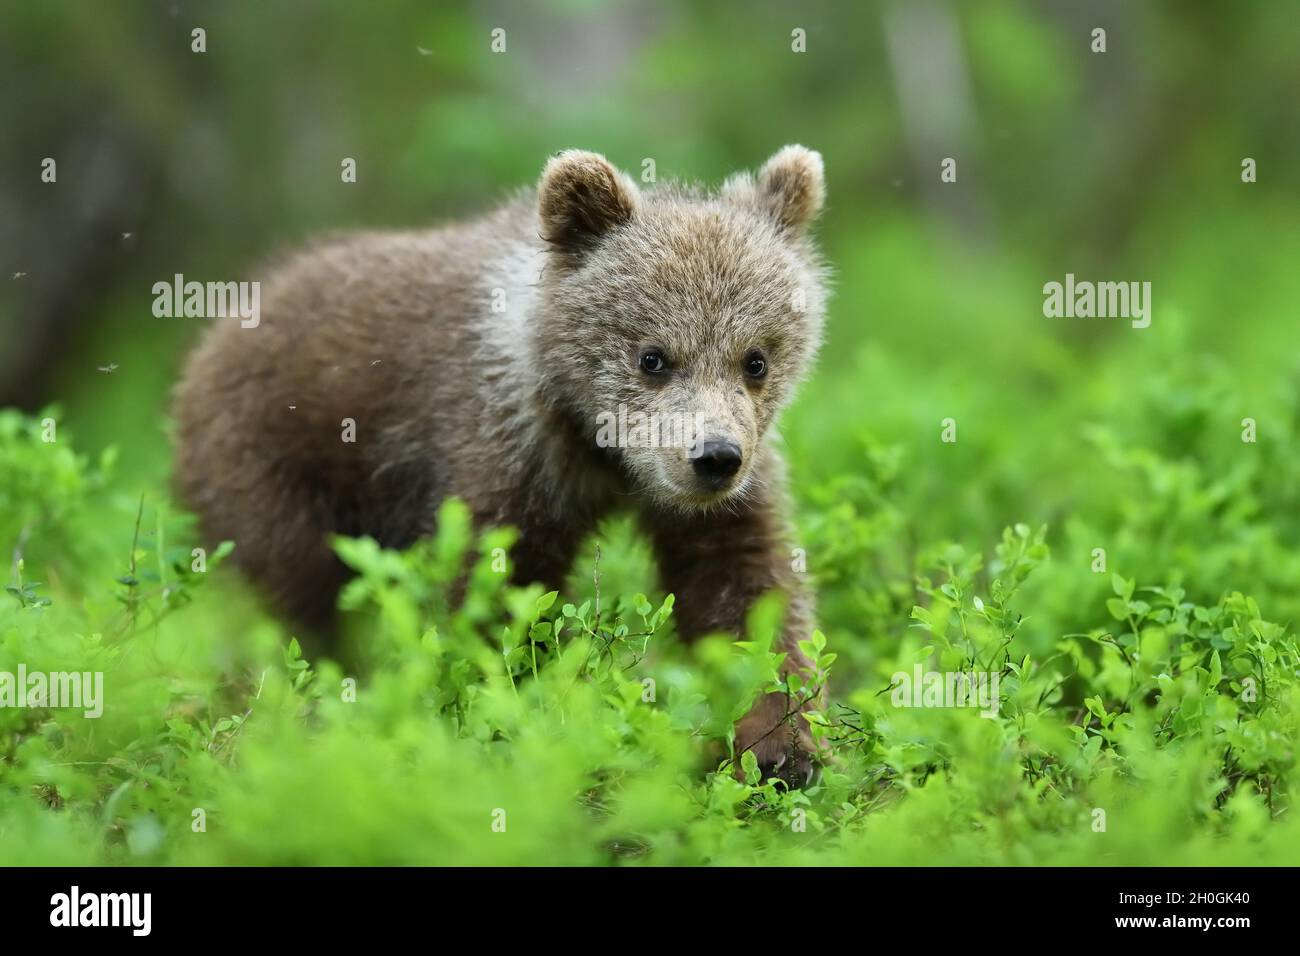 brown bear cub walking in the forest at summer Stock Photo